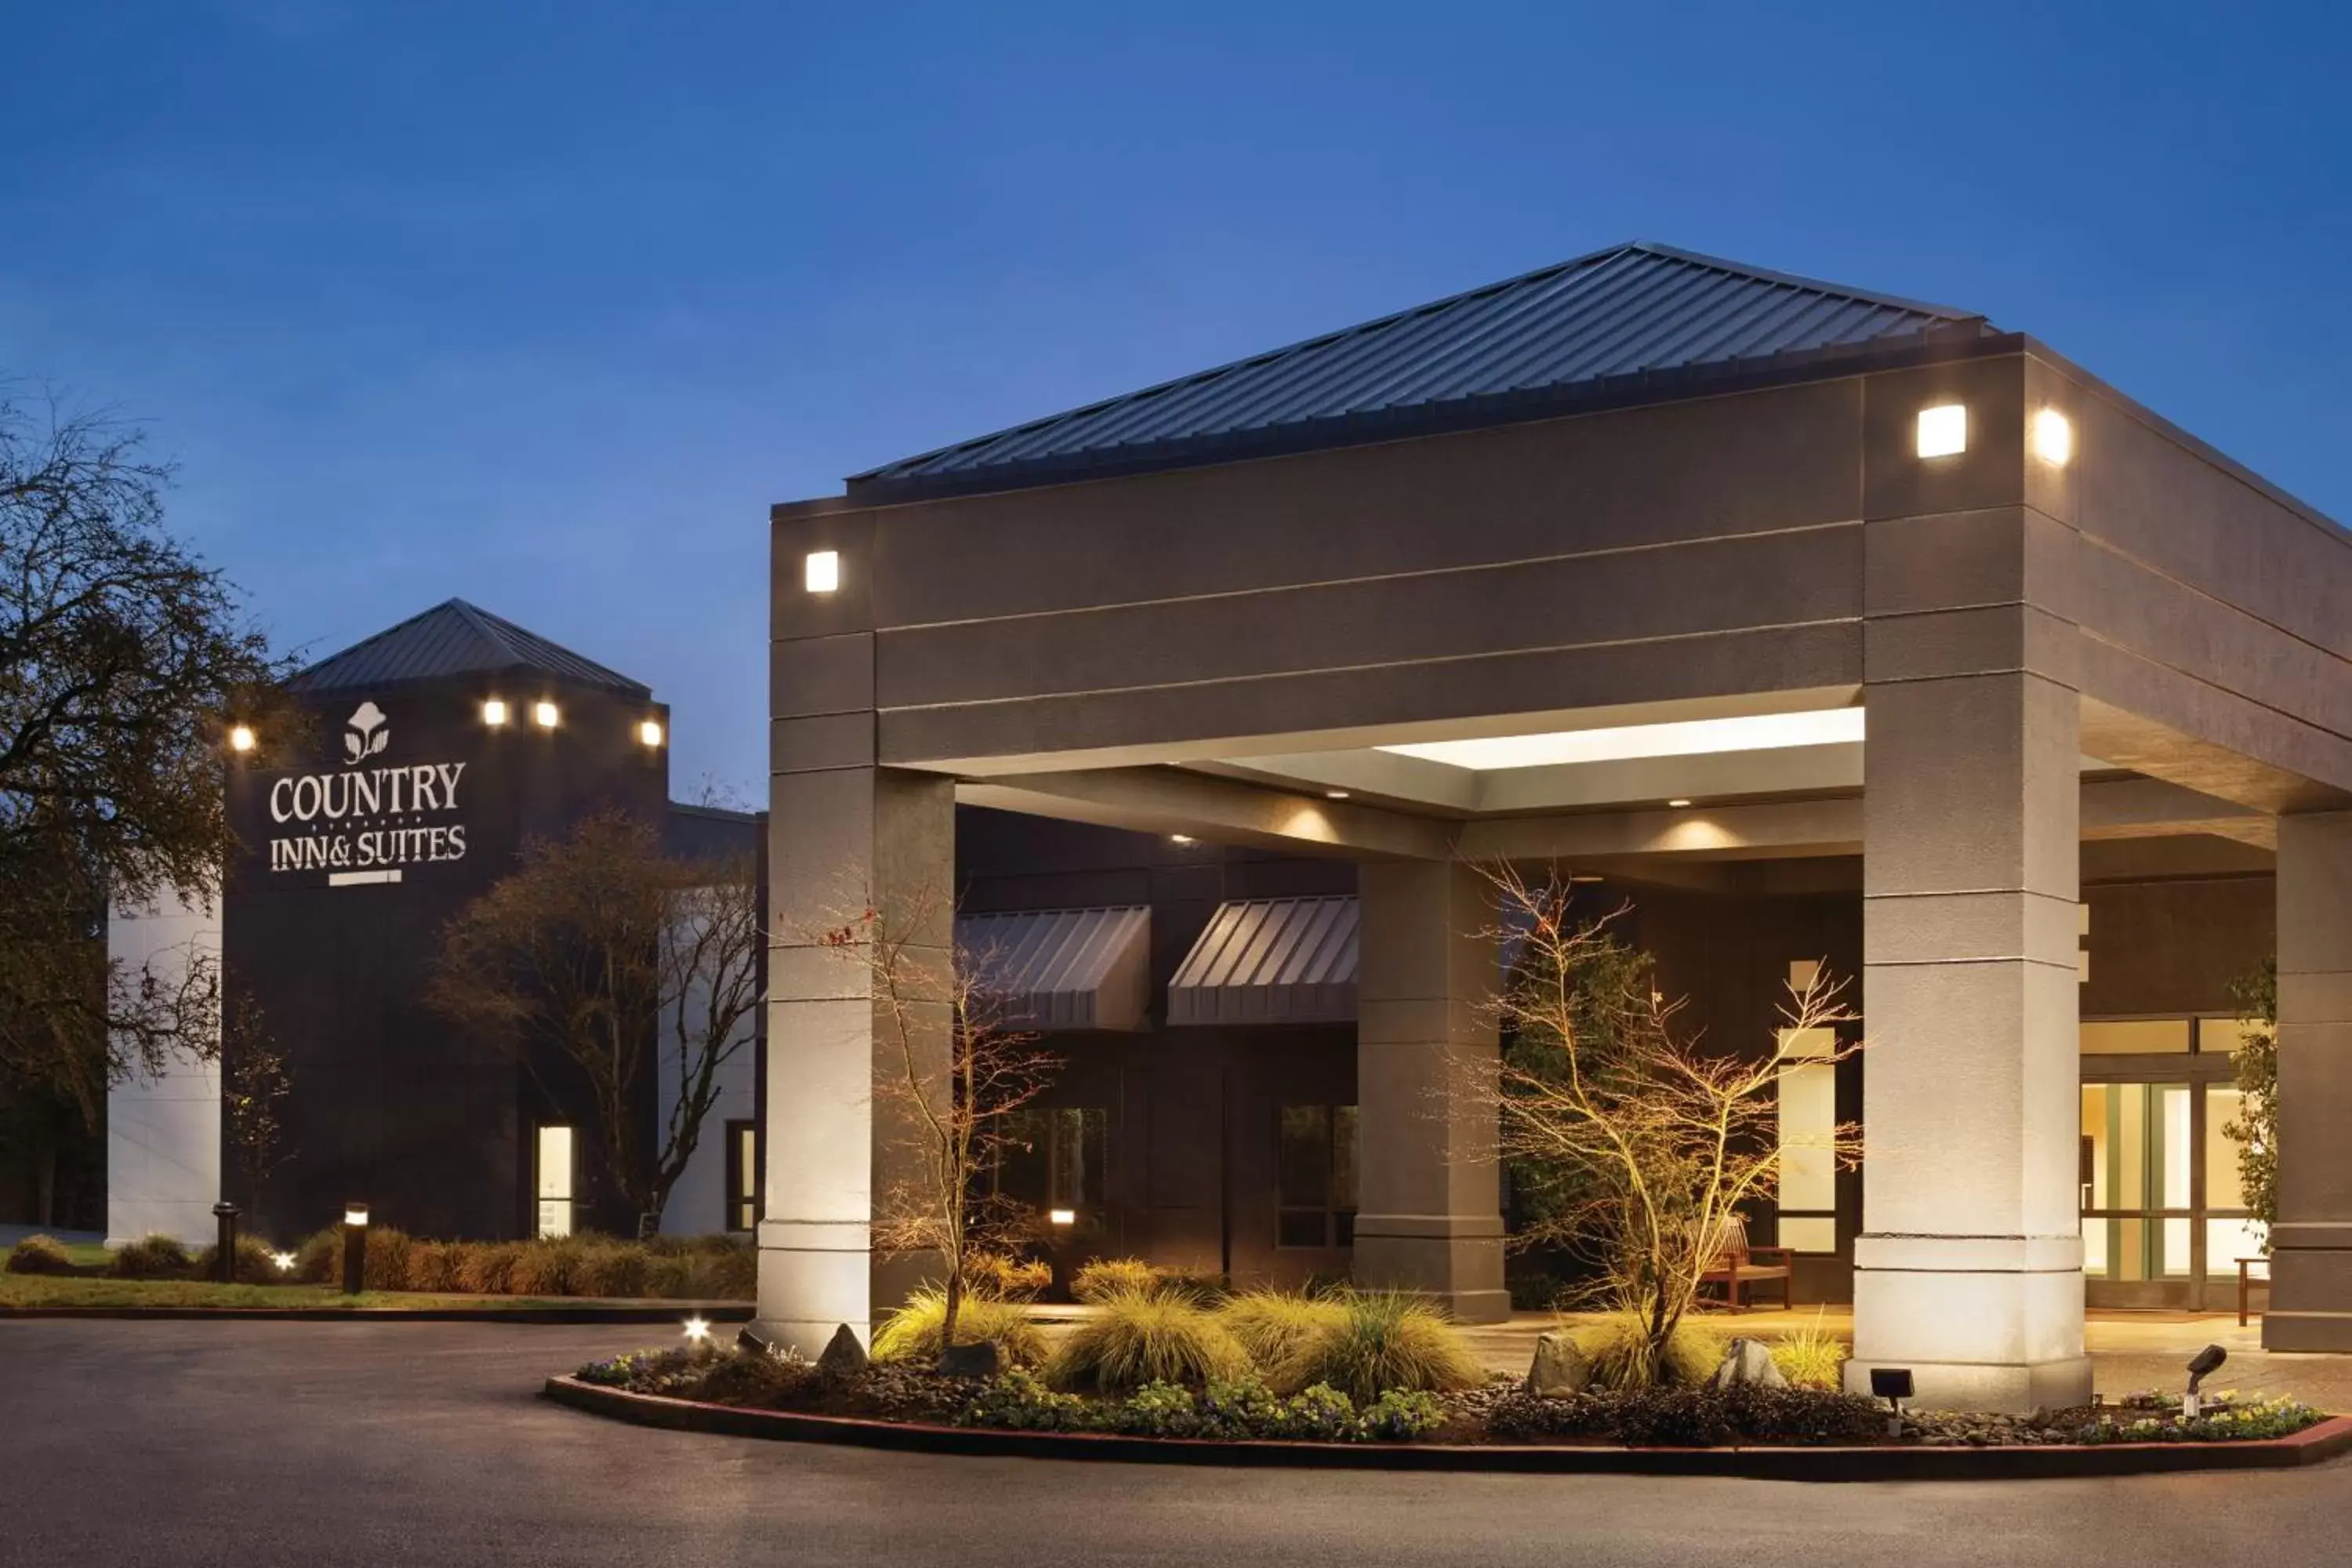 Facade/entrance, Property Building in Country Inn & Suites by Radisson, Seattle-Bothell, WA